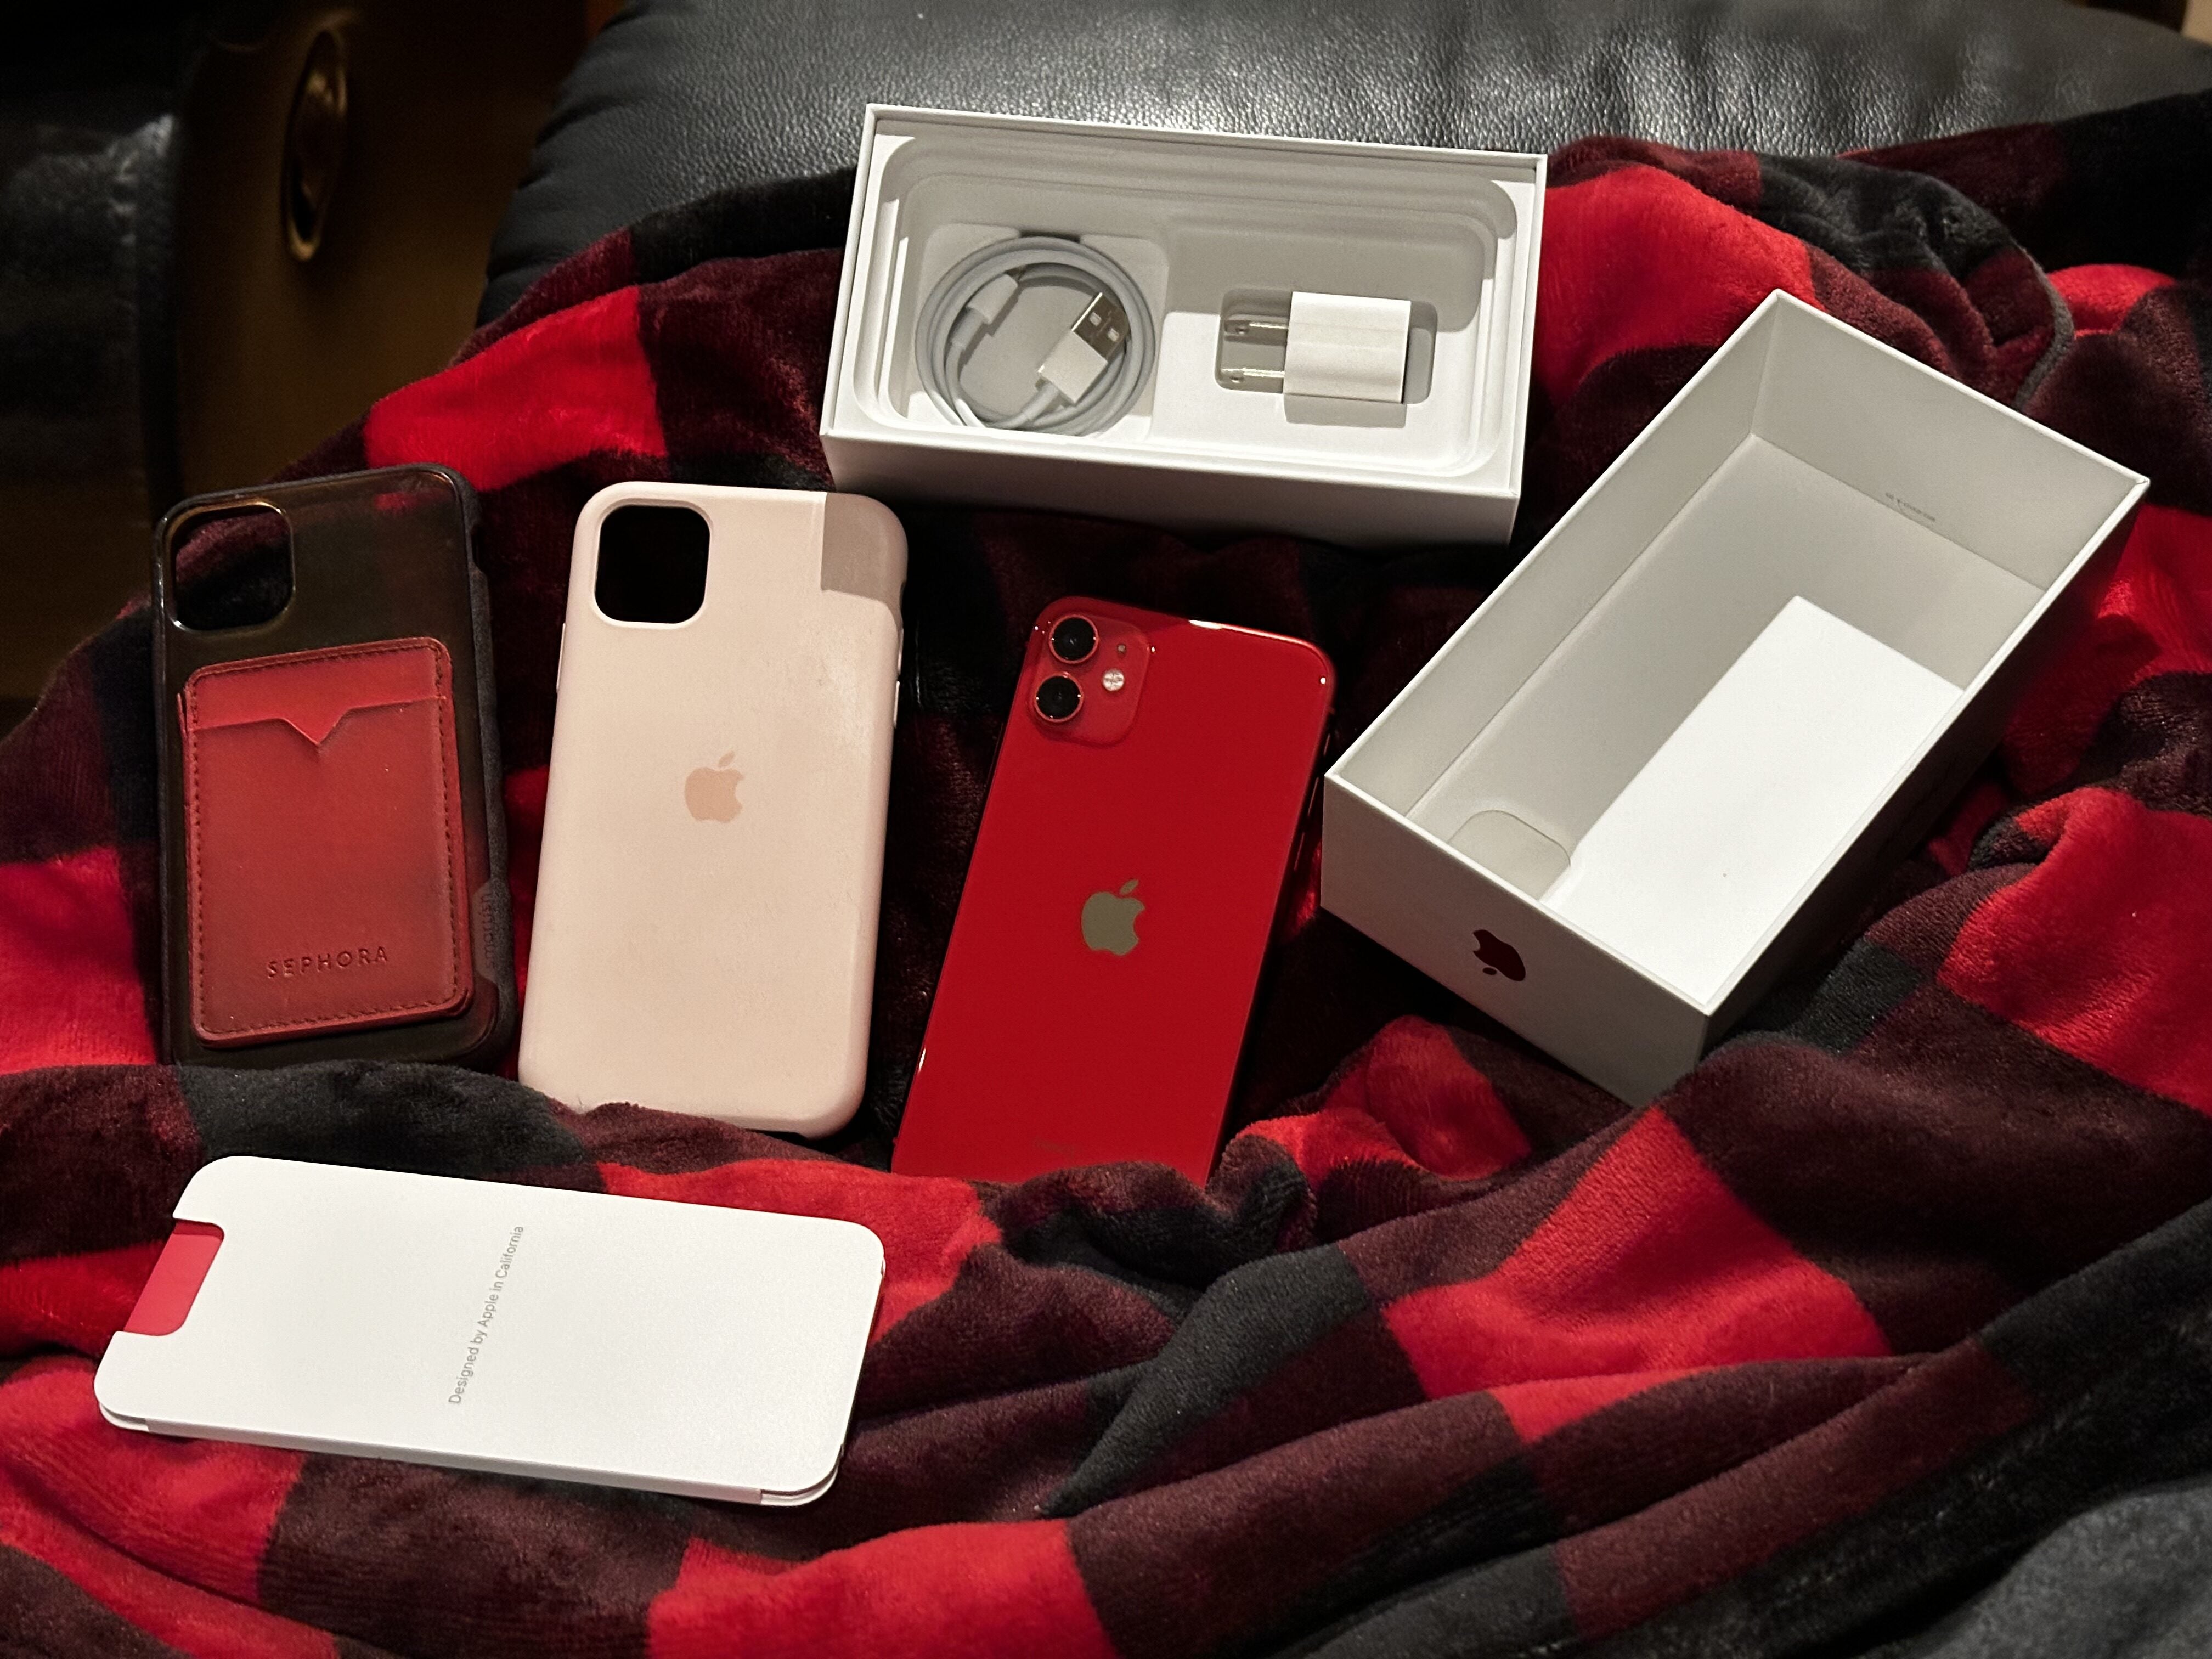 Product Red iPhone 11 (64gb) for sale - RedFlagDeals.com Forums